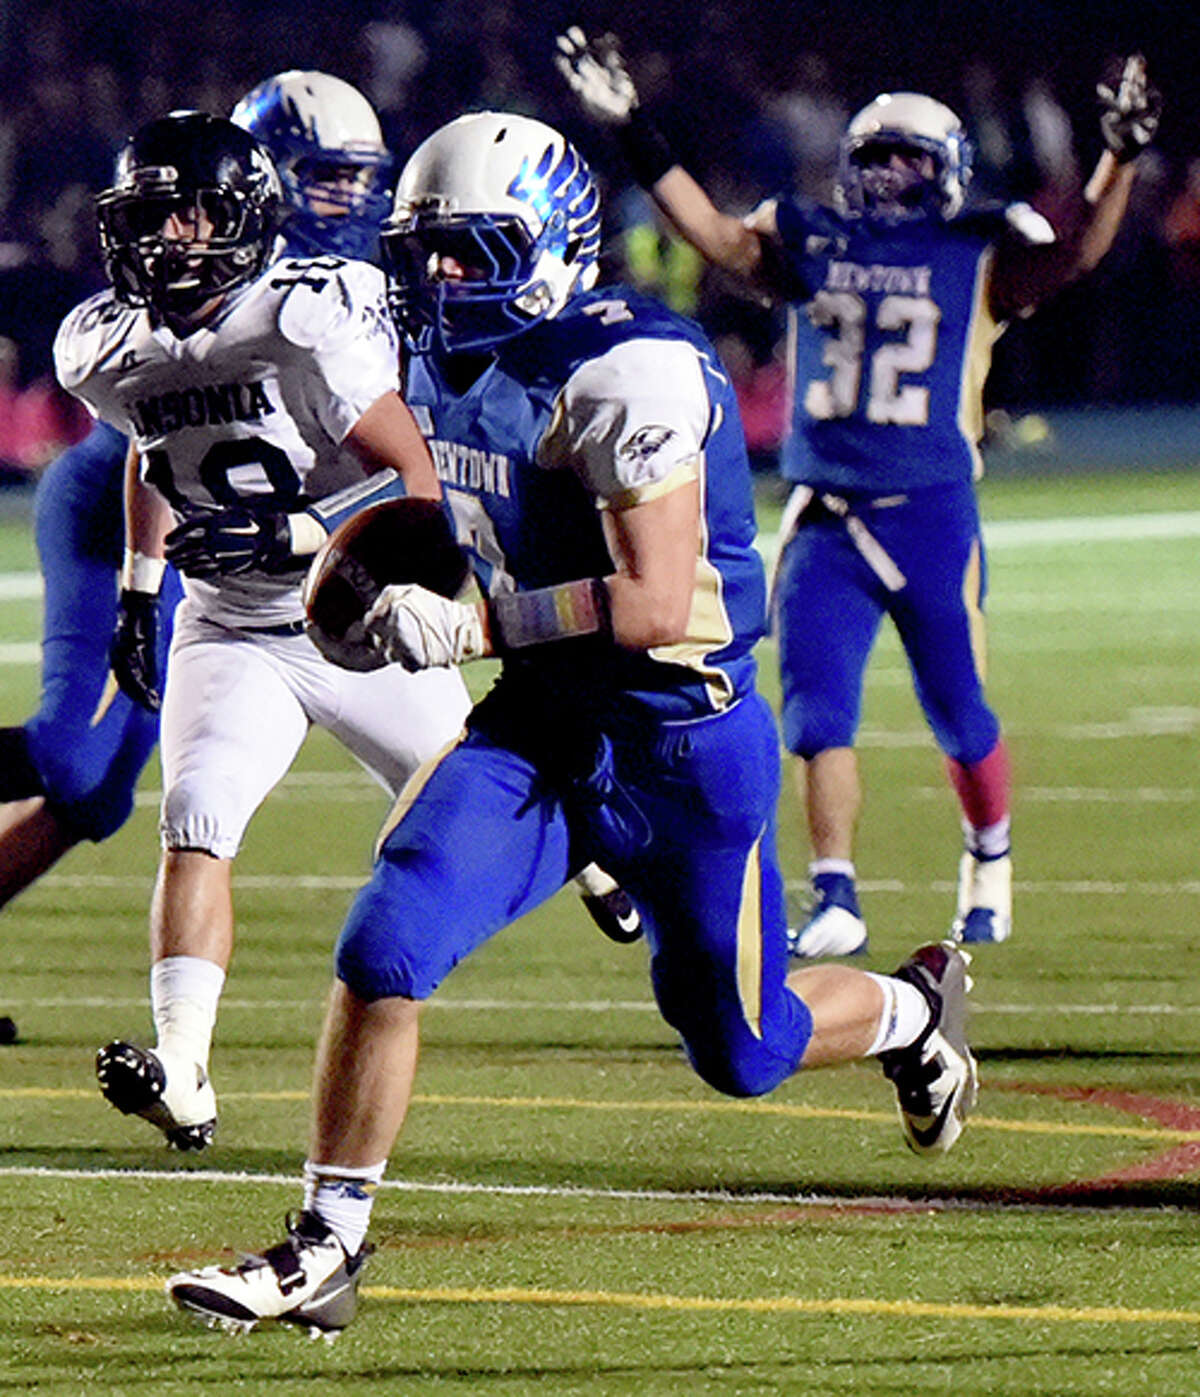 Jared Pearson runs for a first-quarter 18-yard touchdown for Newtown during its 14-8 victory over Ansonia. Newtown never trailed and ended the Chargers’ 48-game win streak (Photo Peter Hvizdak)